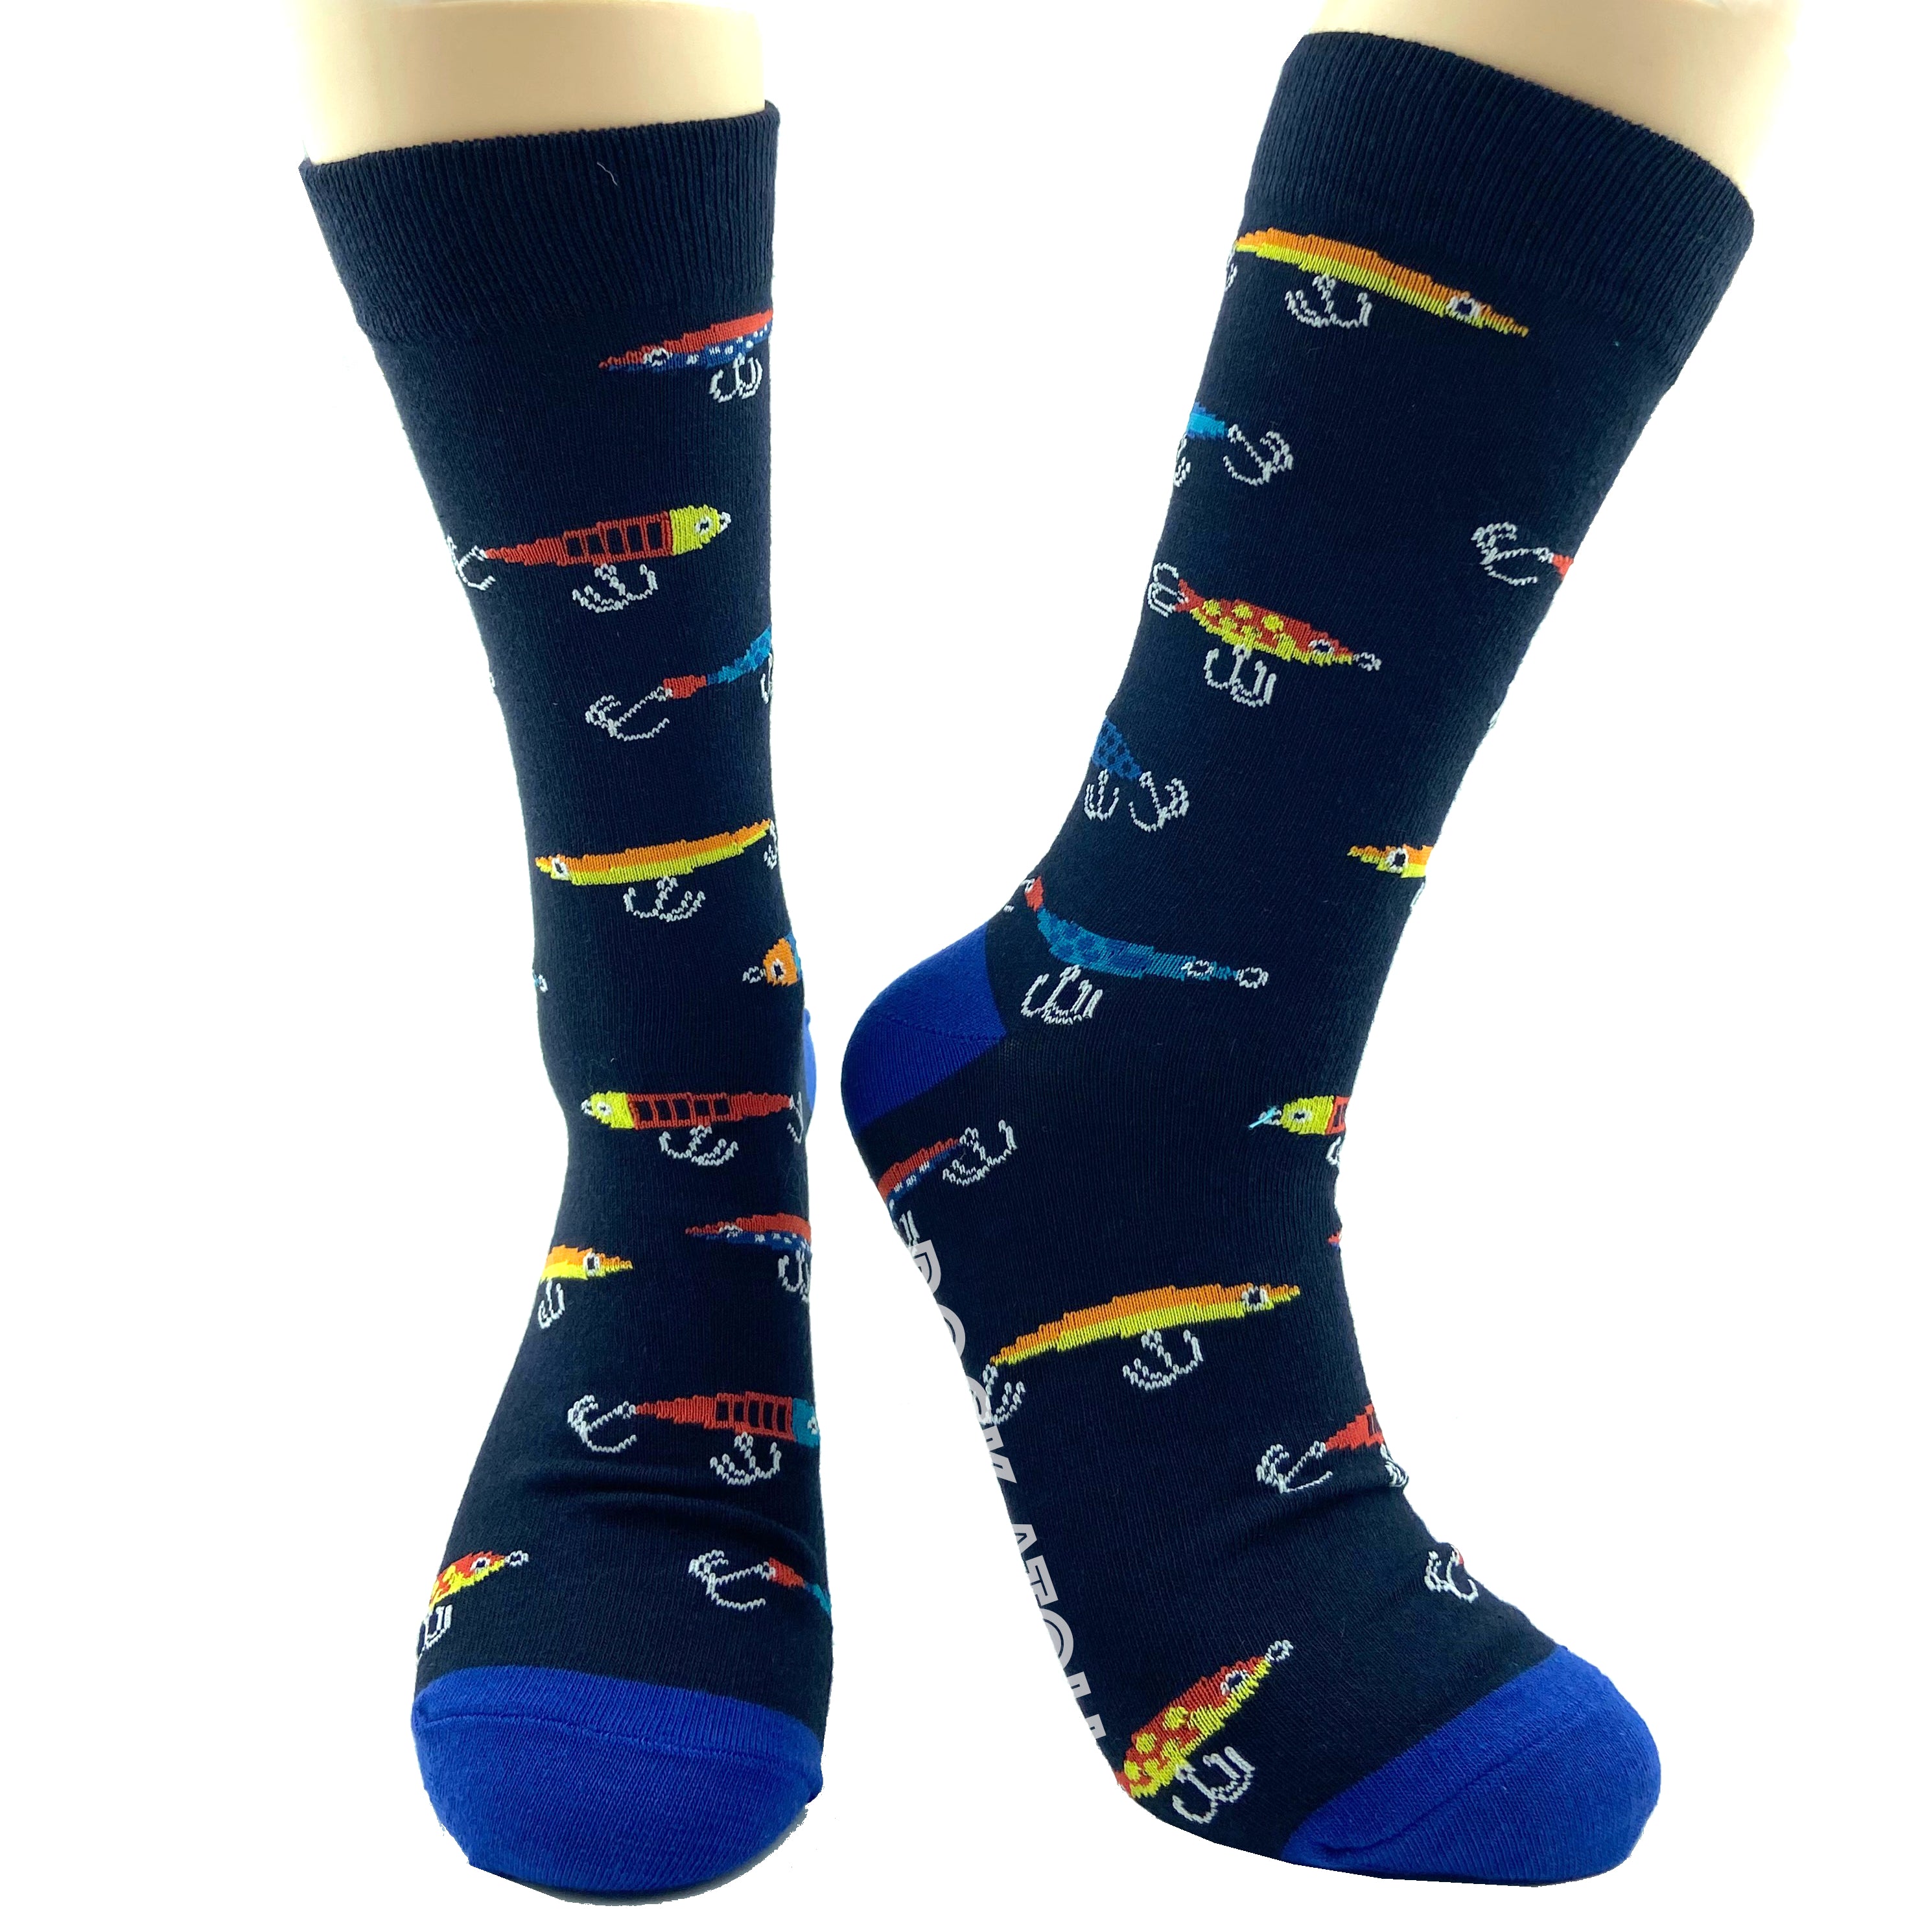 Fun Funky & Colorful Novelty Crew Dress Socks for Men and Women